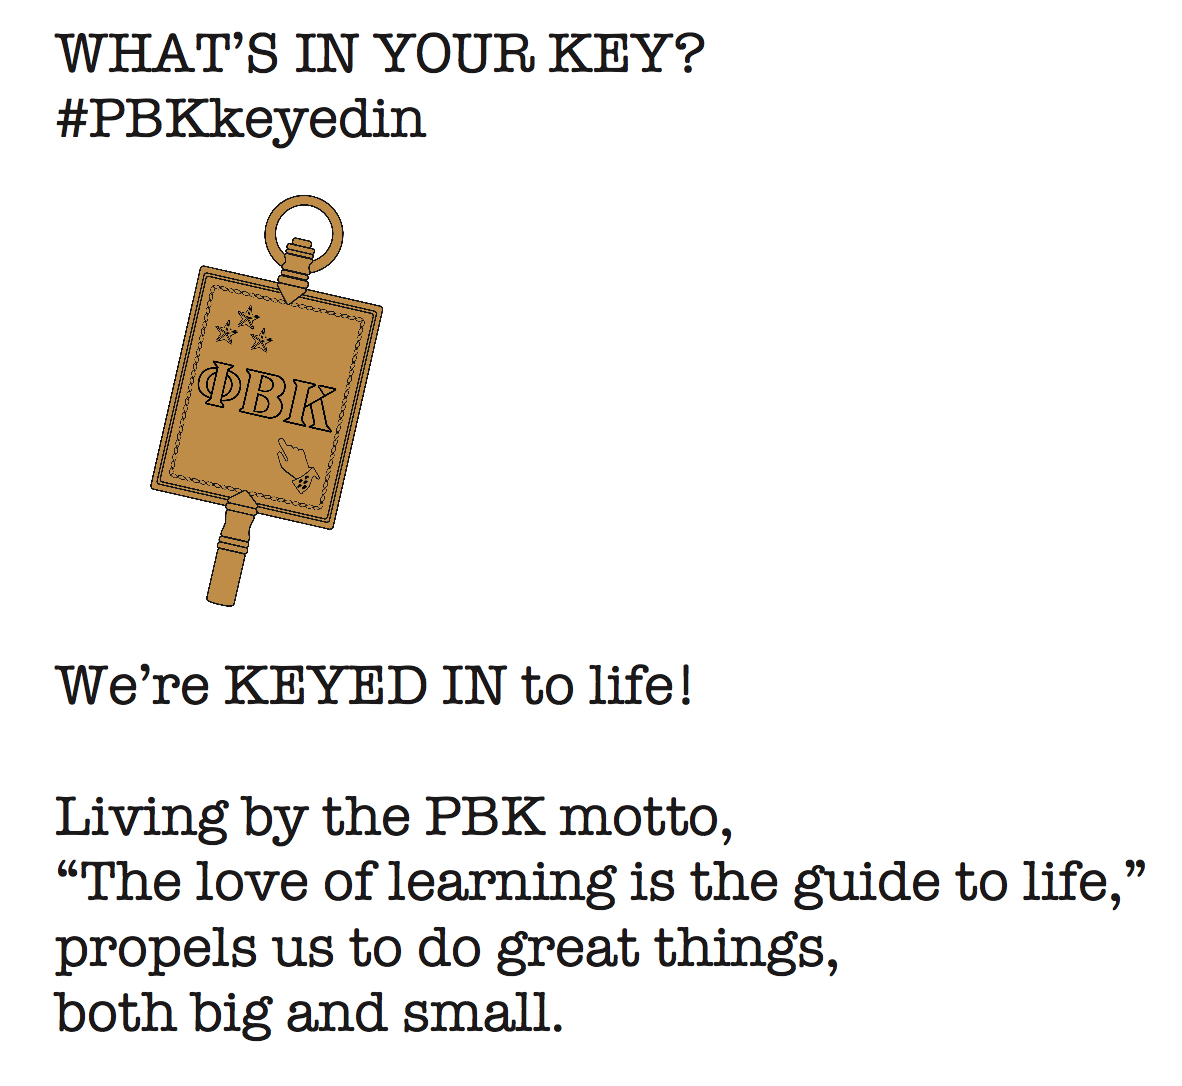 whats in your key